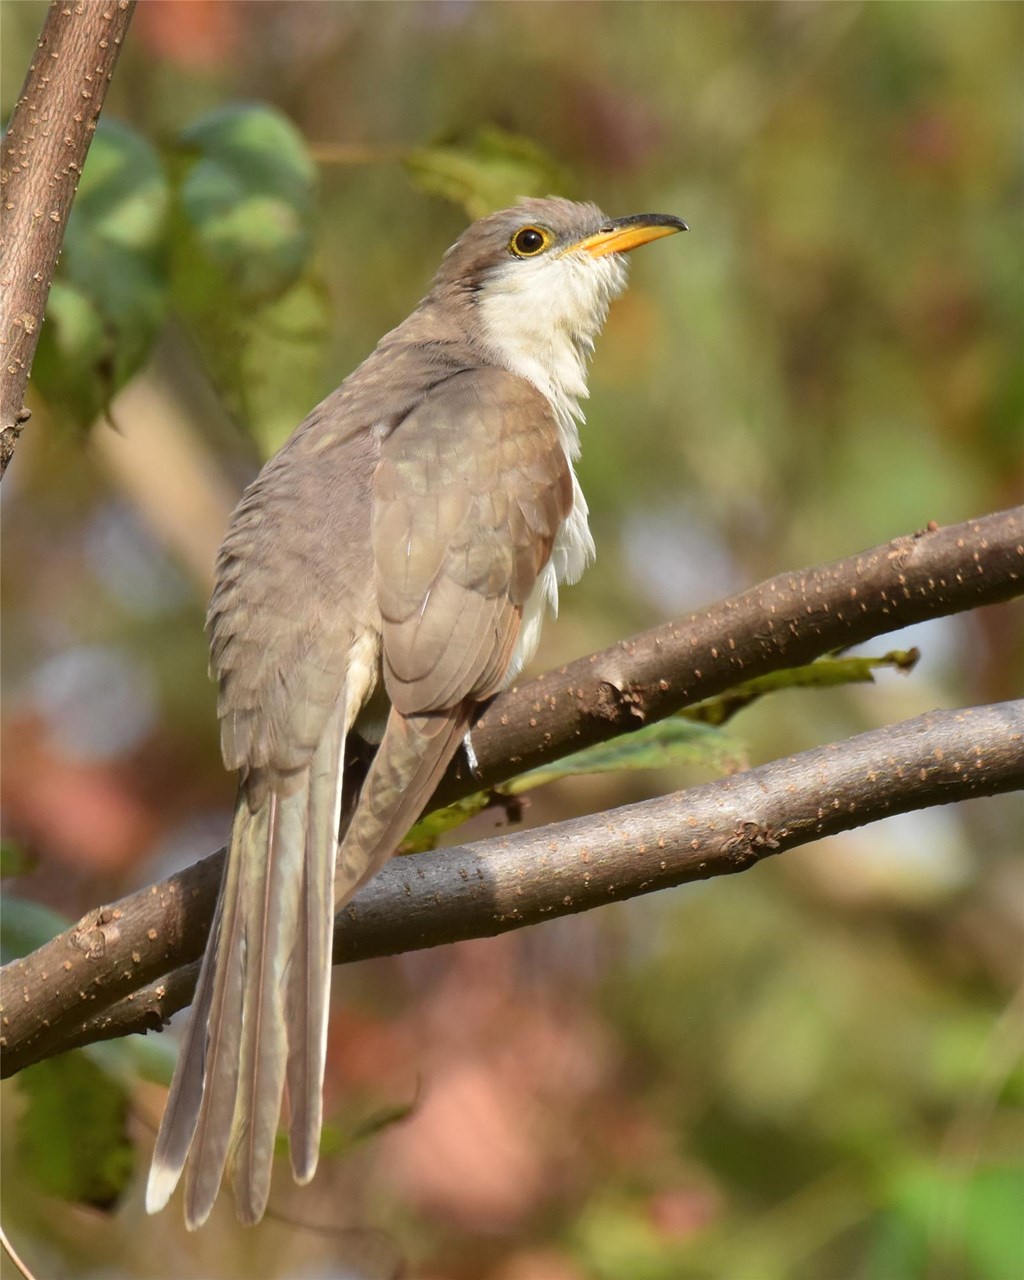 Yellow-billed Cuckoo perched on a branch